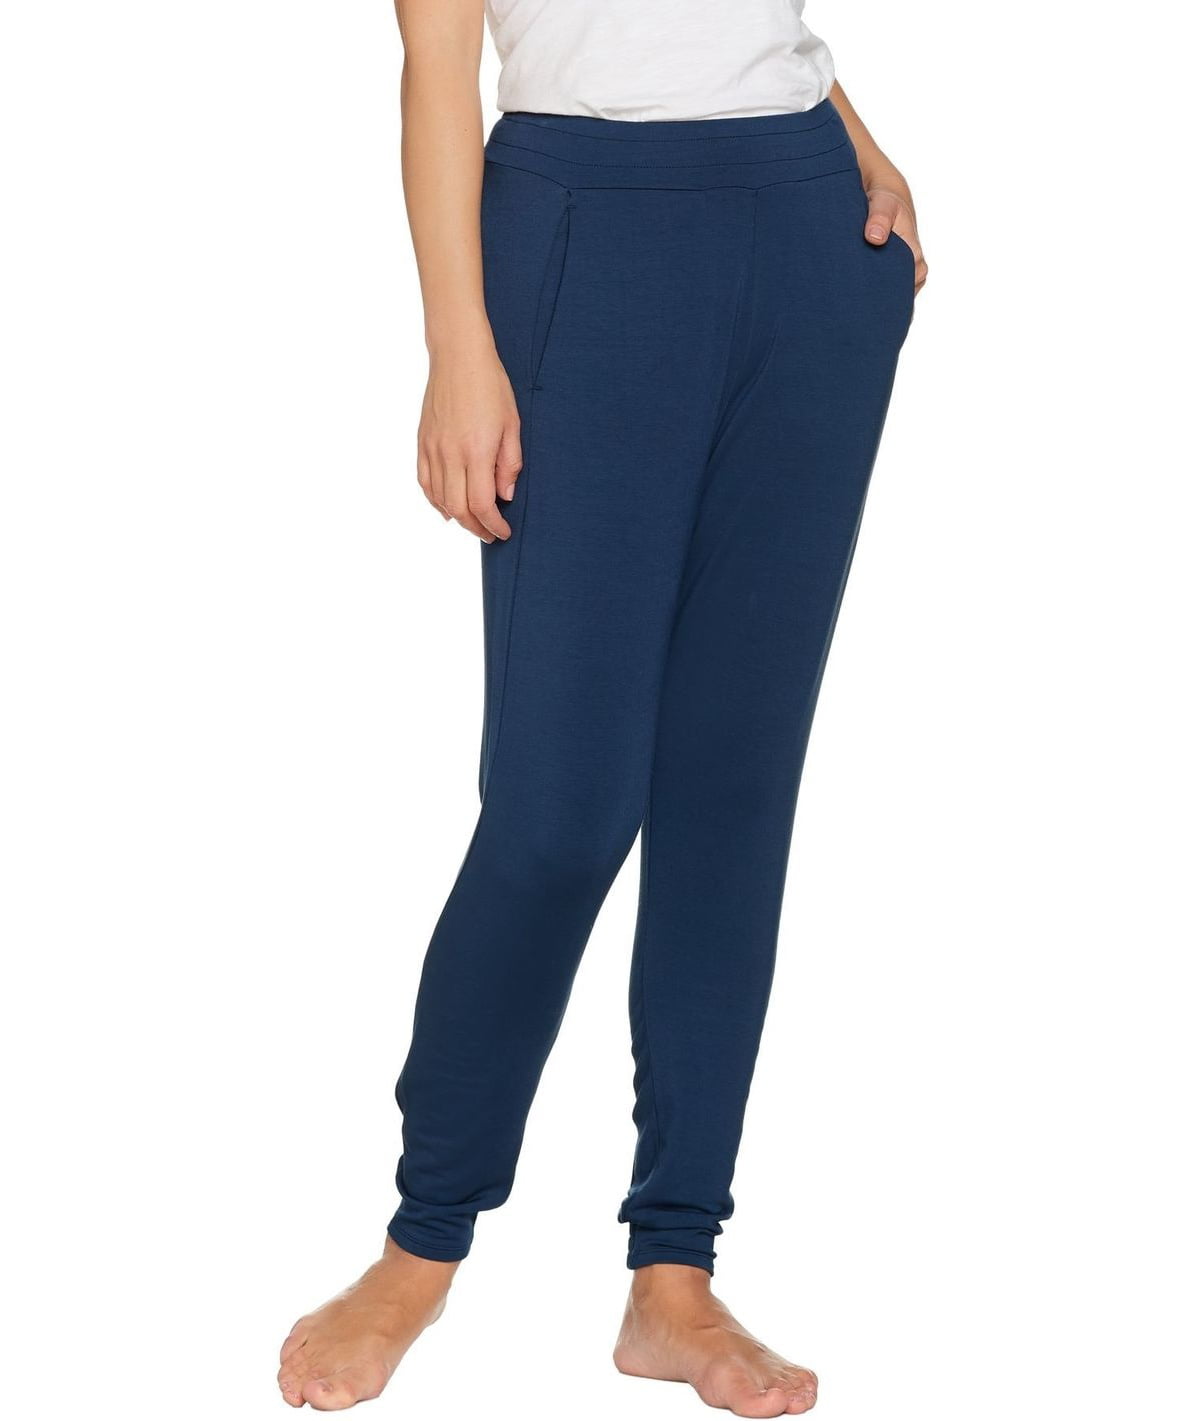 ClimateRight by Cuddl Duds - Cuddl Duds Ultra Soft Comfort Slim Pant ...